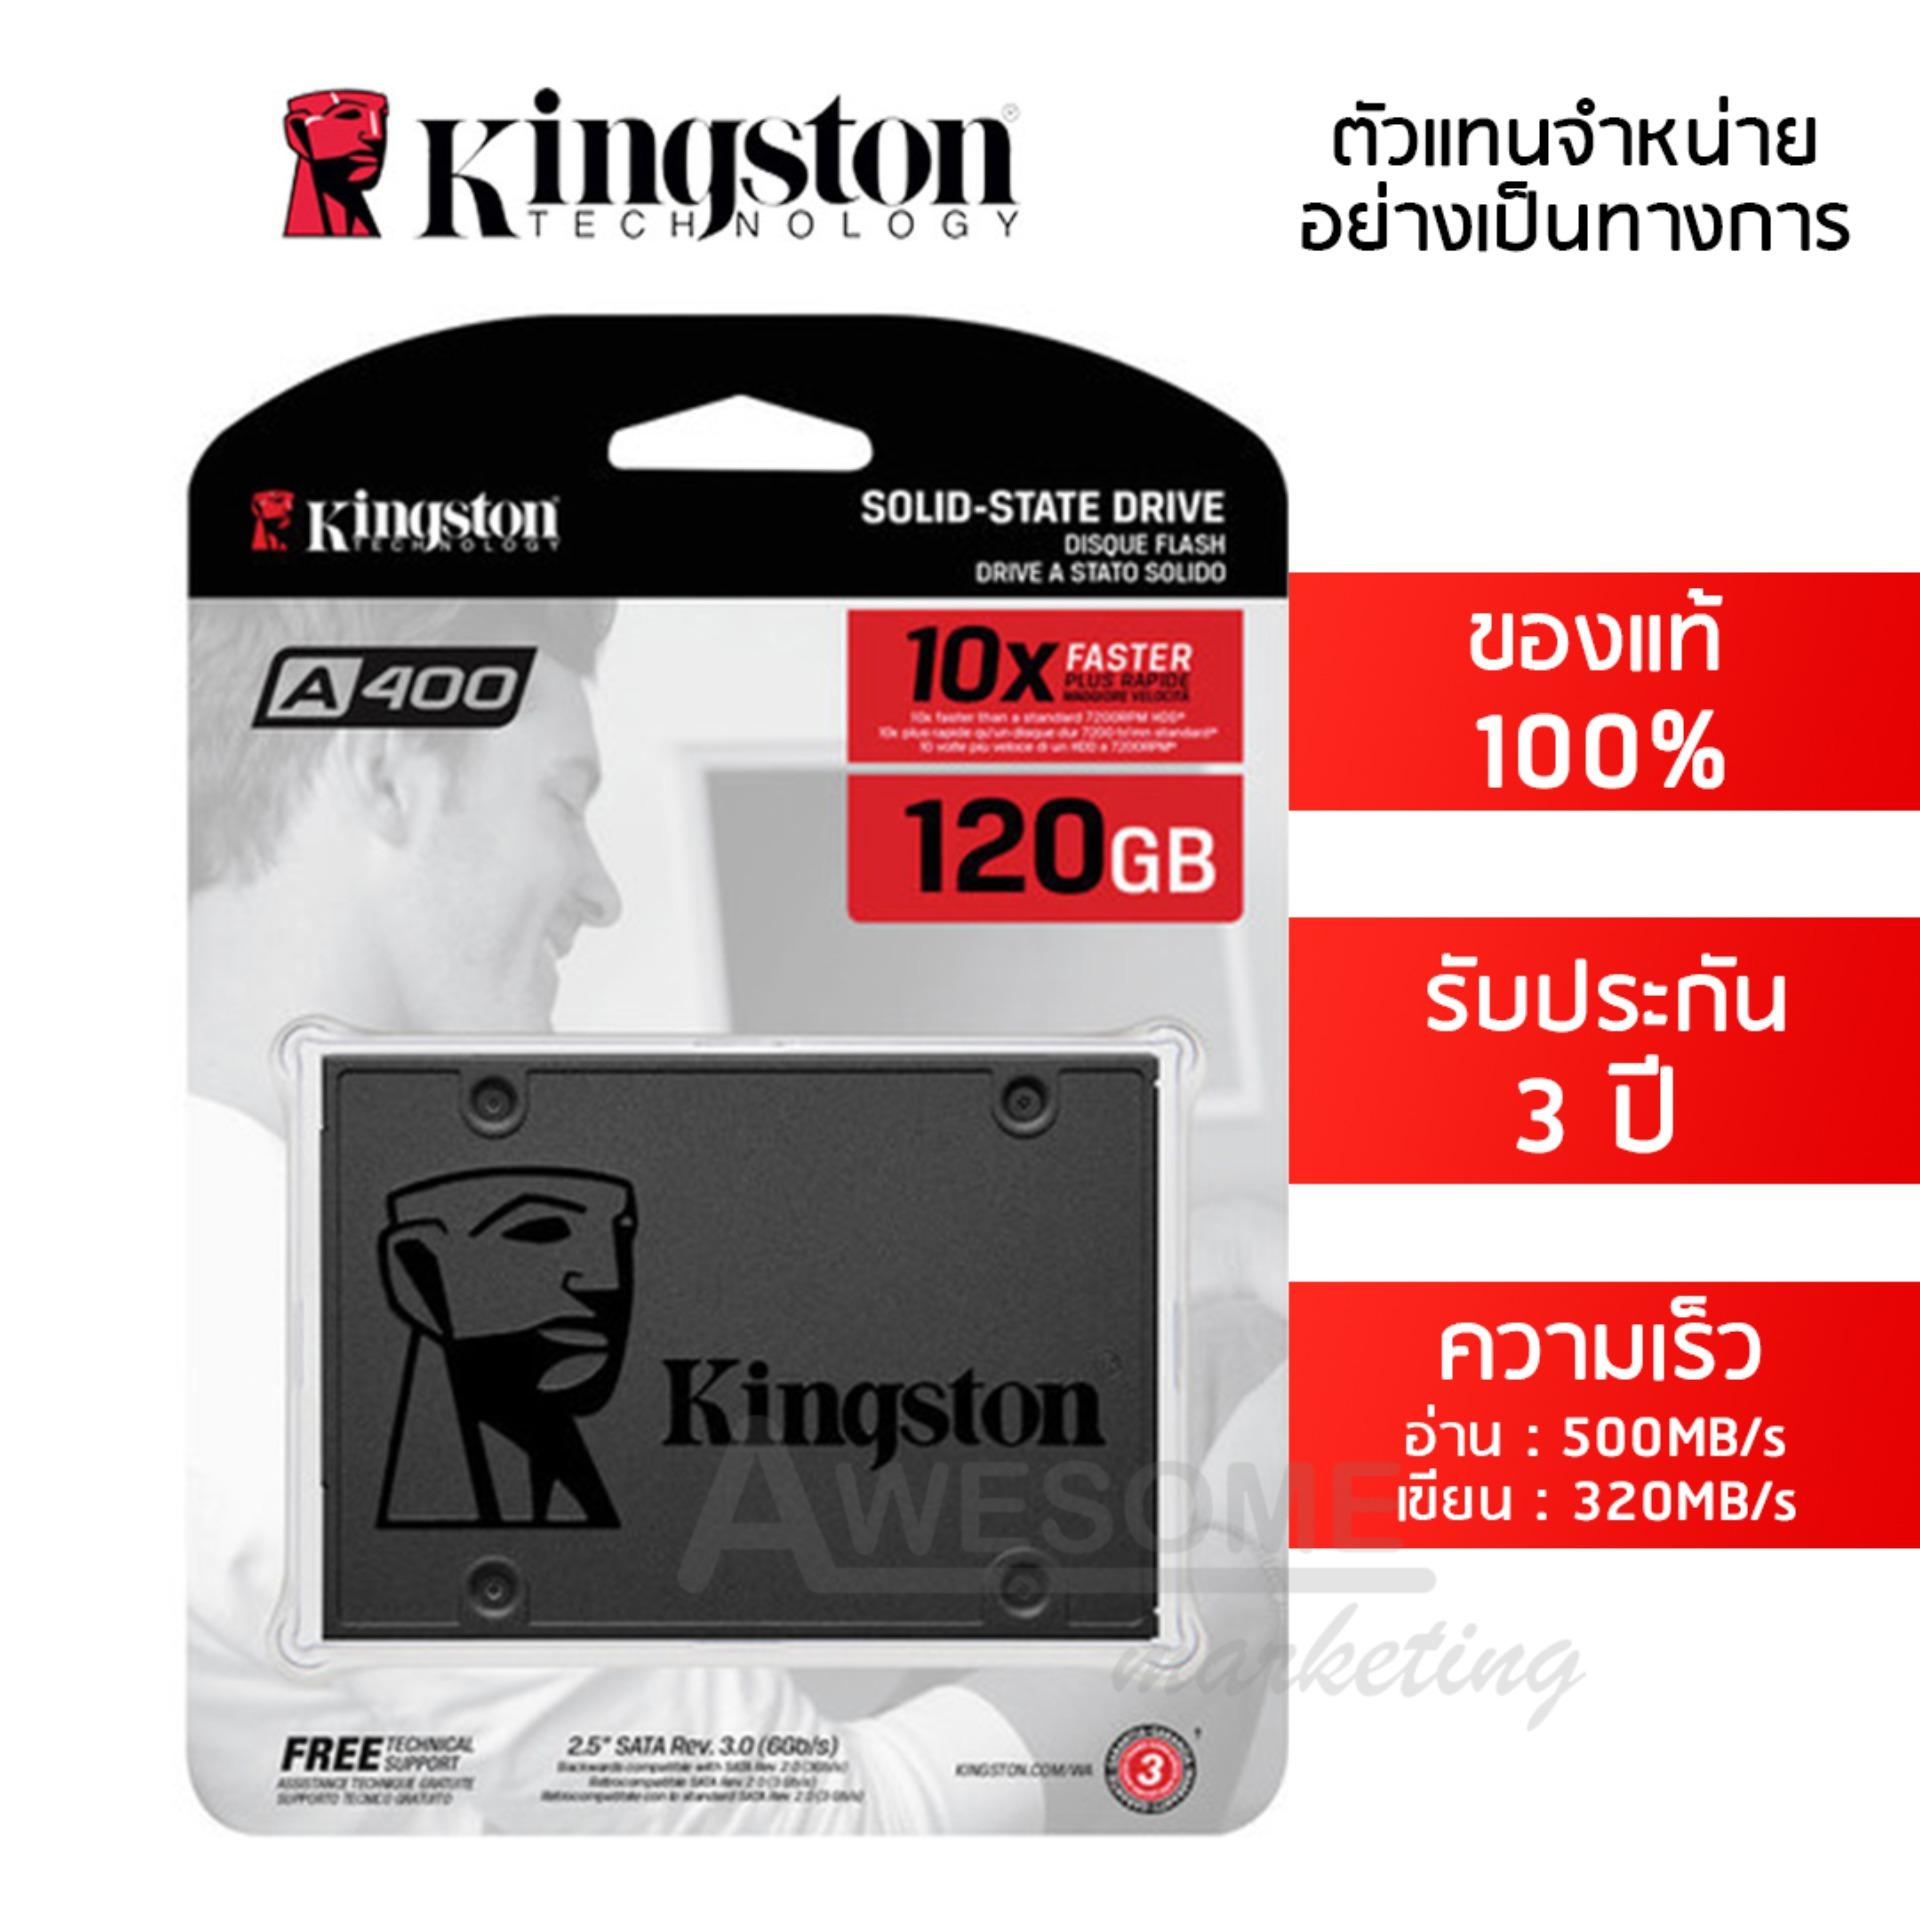 Kingston solid state hard drive รุ่น A400 ความเร็ว r/500 w/320 MB/s